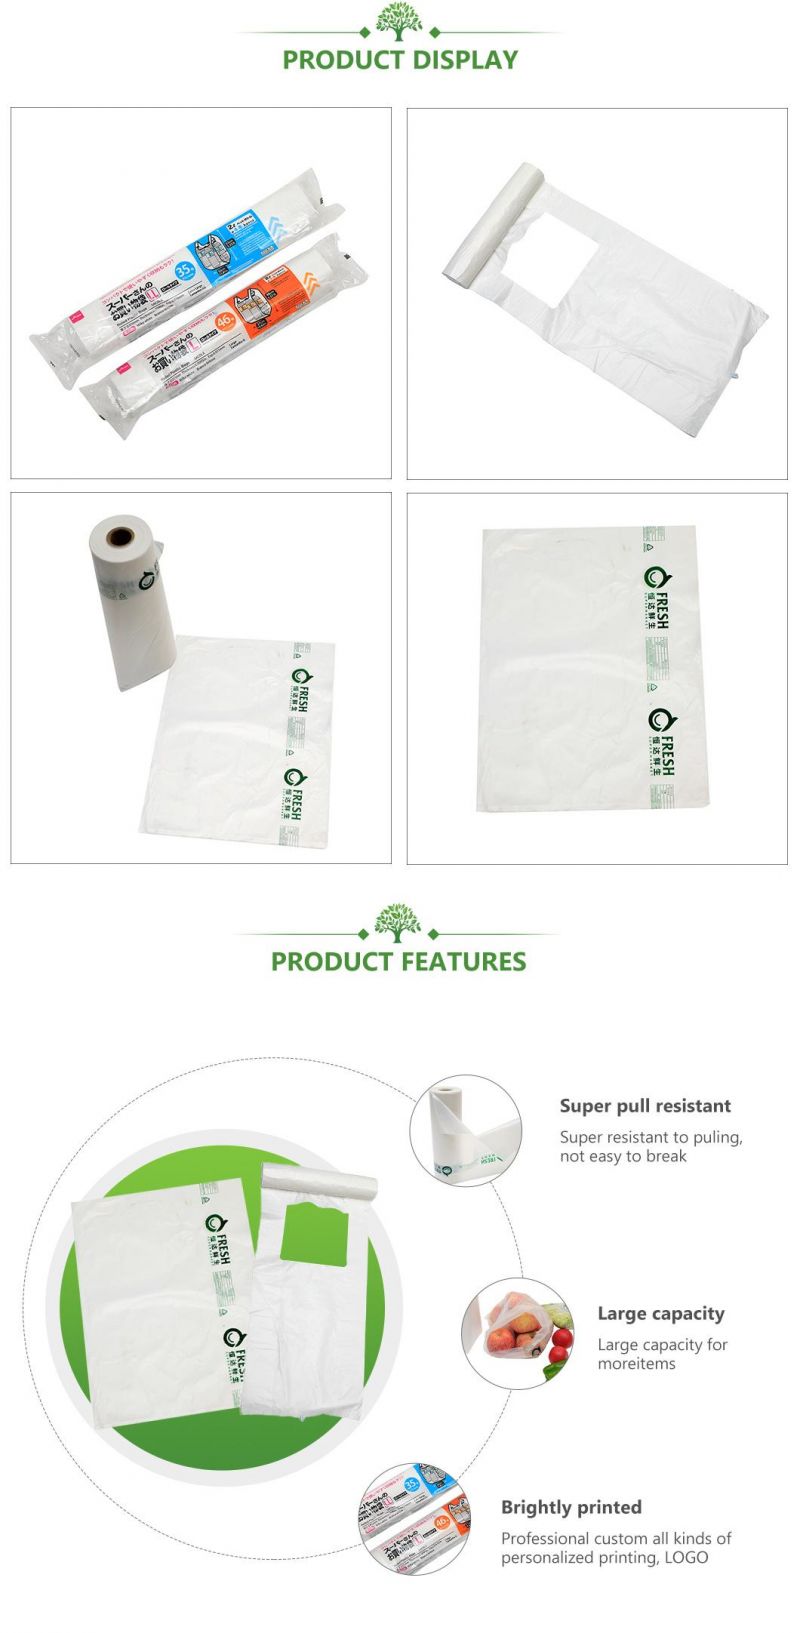 China Biodegradable Bags Compostable Flat Bags, Produce Bags, Roller Bags Manufacturer with Ok Compost Home, Ok Compost Industrial, Seeding Certificat